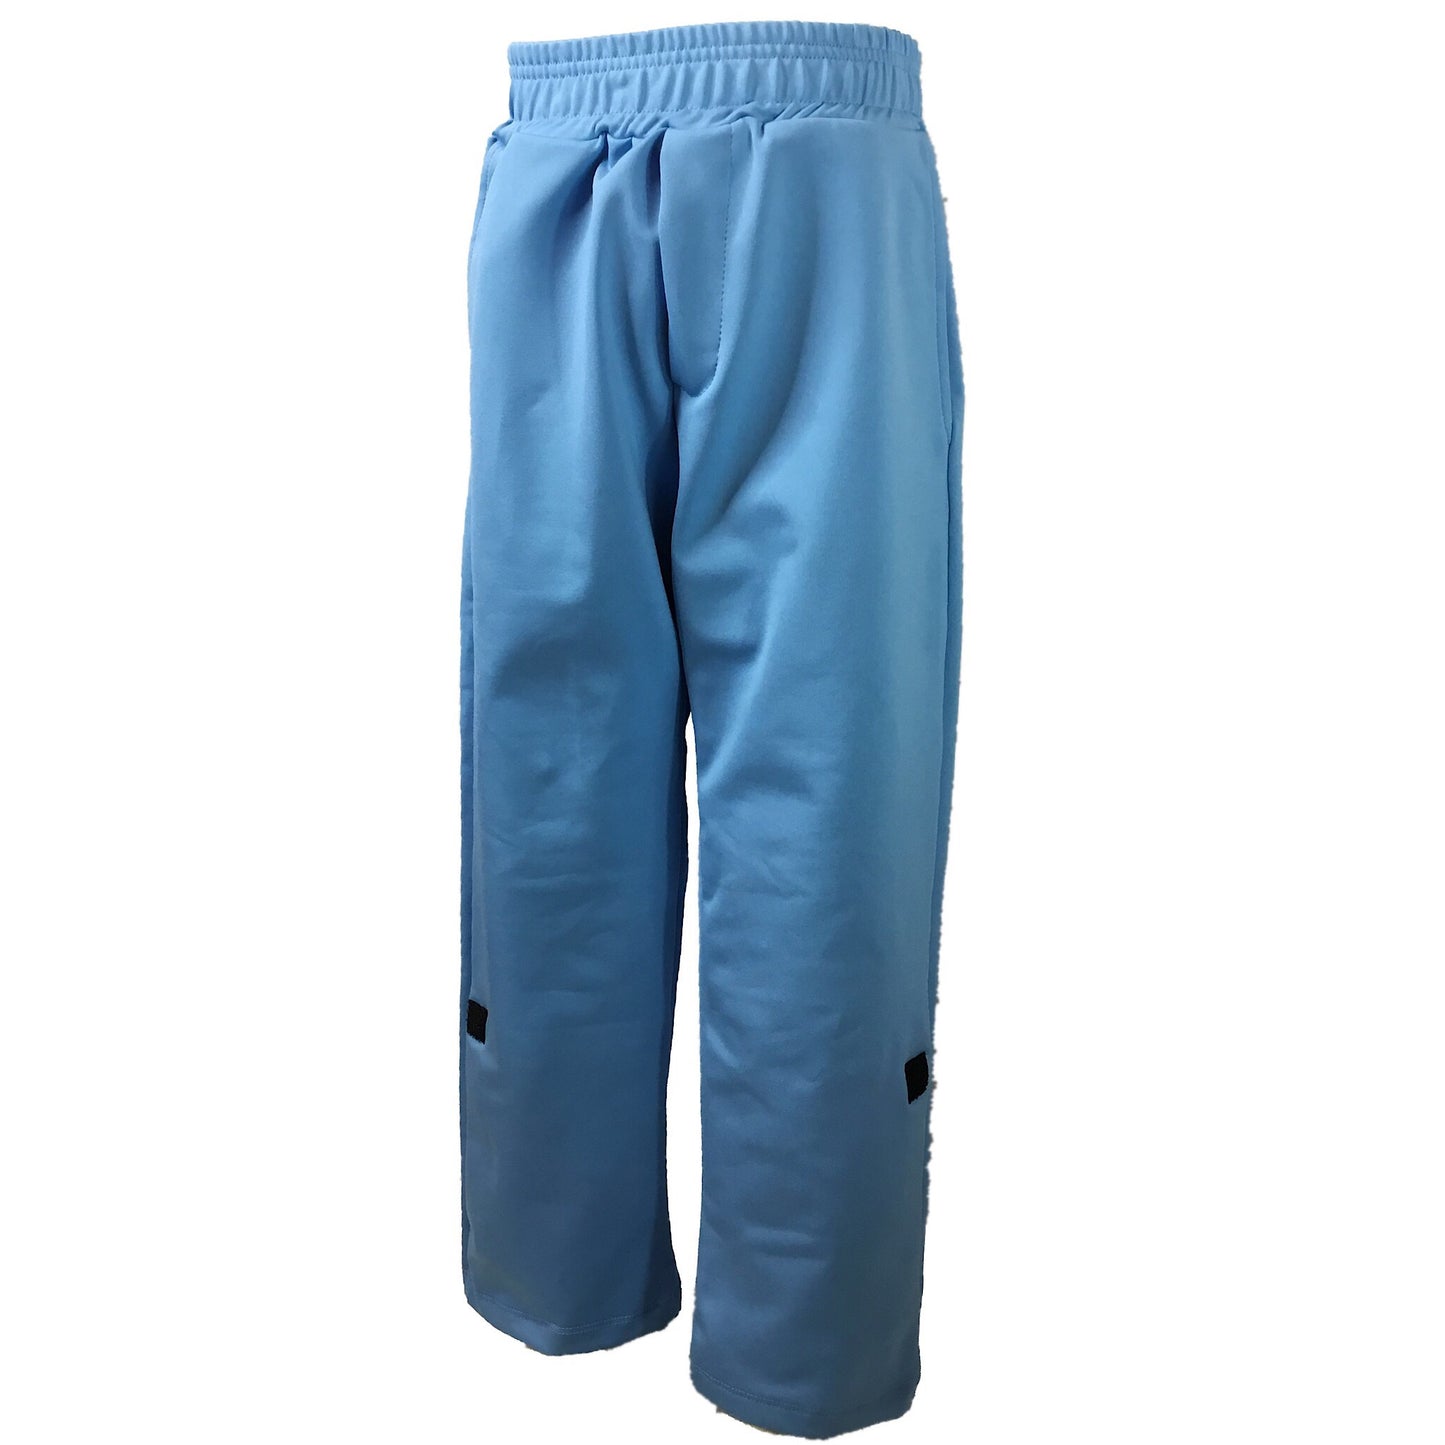 Boys UPF 50+ Long Pants For Sale - Kids UPF Clothes | Ambernoon